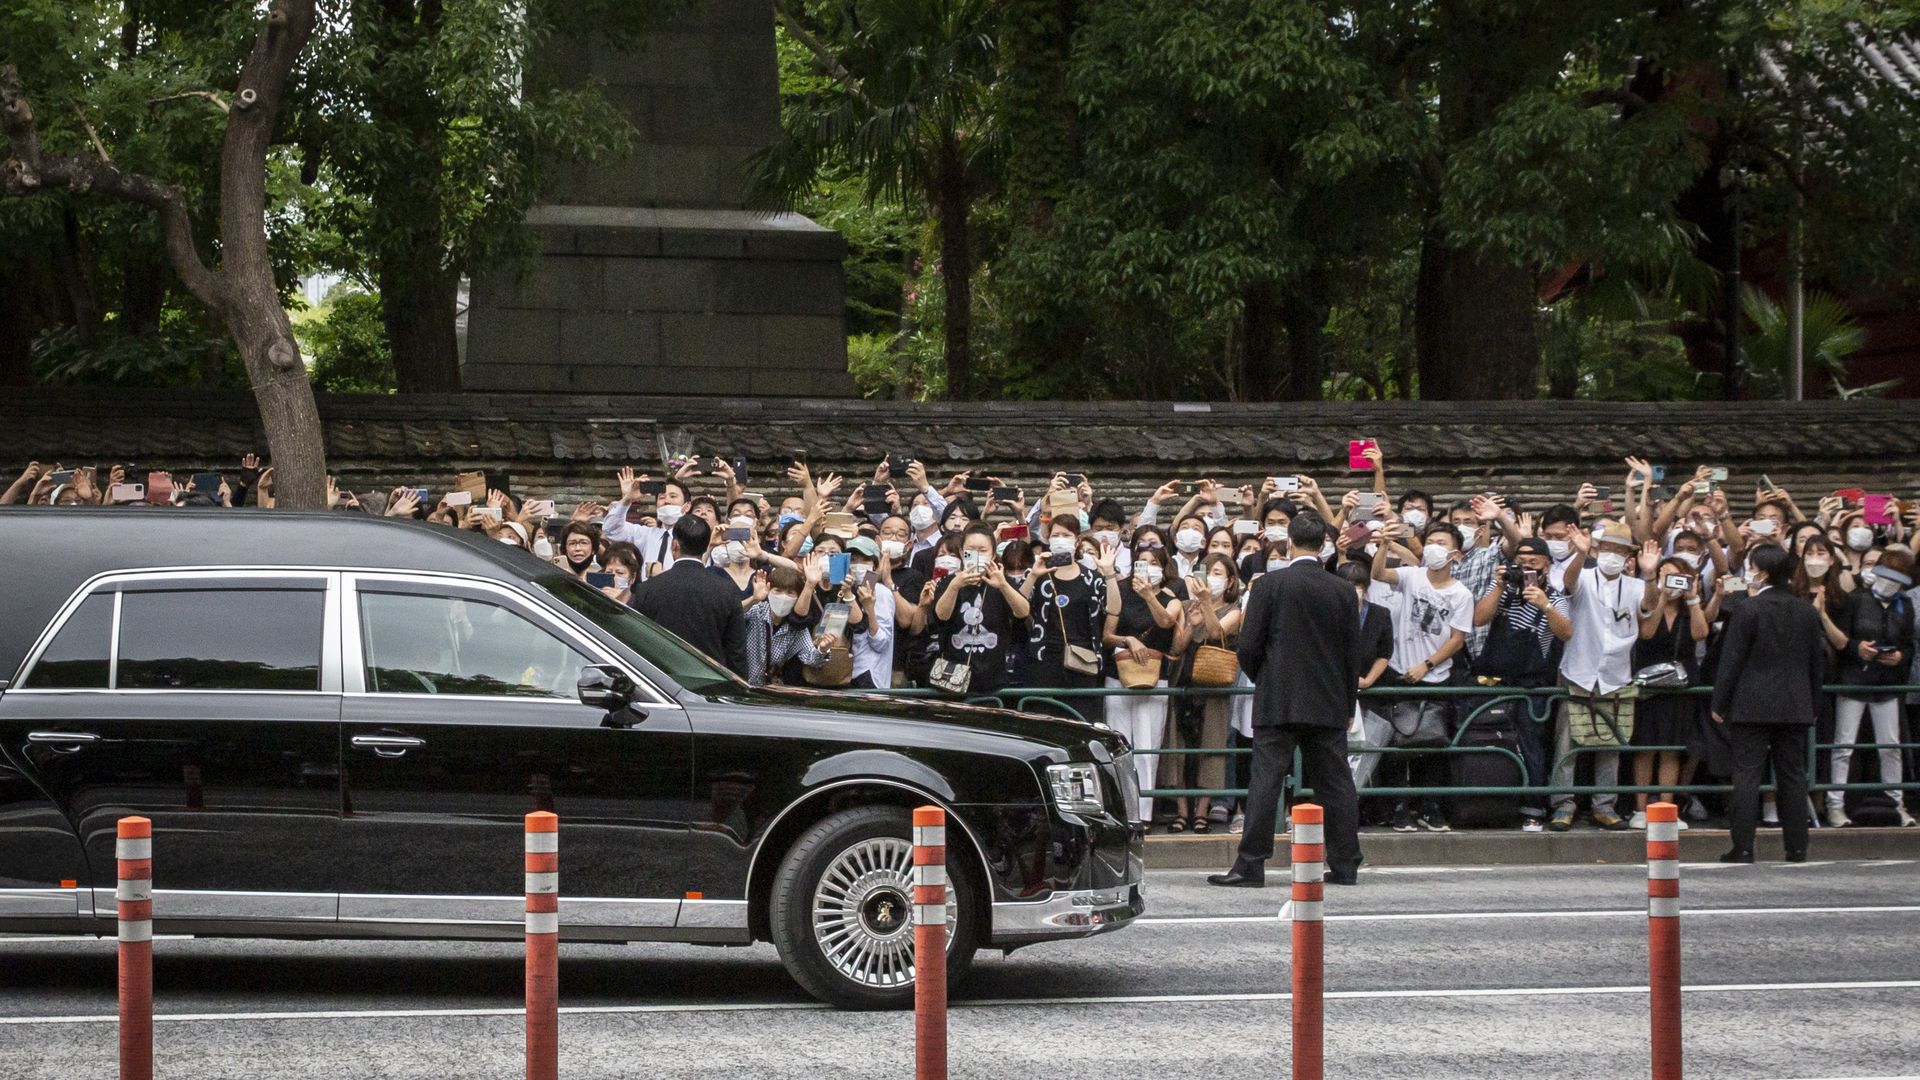 A car carrying the body of Japan's former prime minister Shinzo Abe leaves Zojoji temple where his funeral was held on July 12, 2022 in Tokyo, Japan.